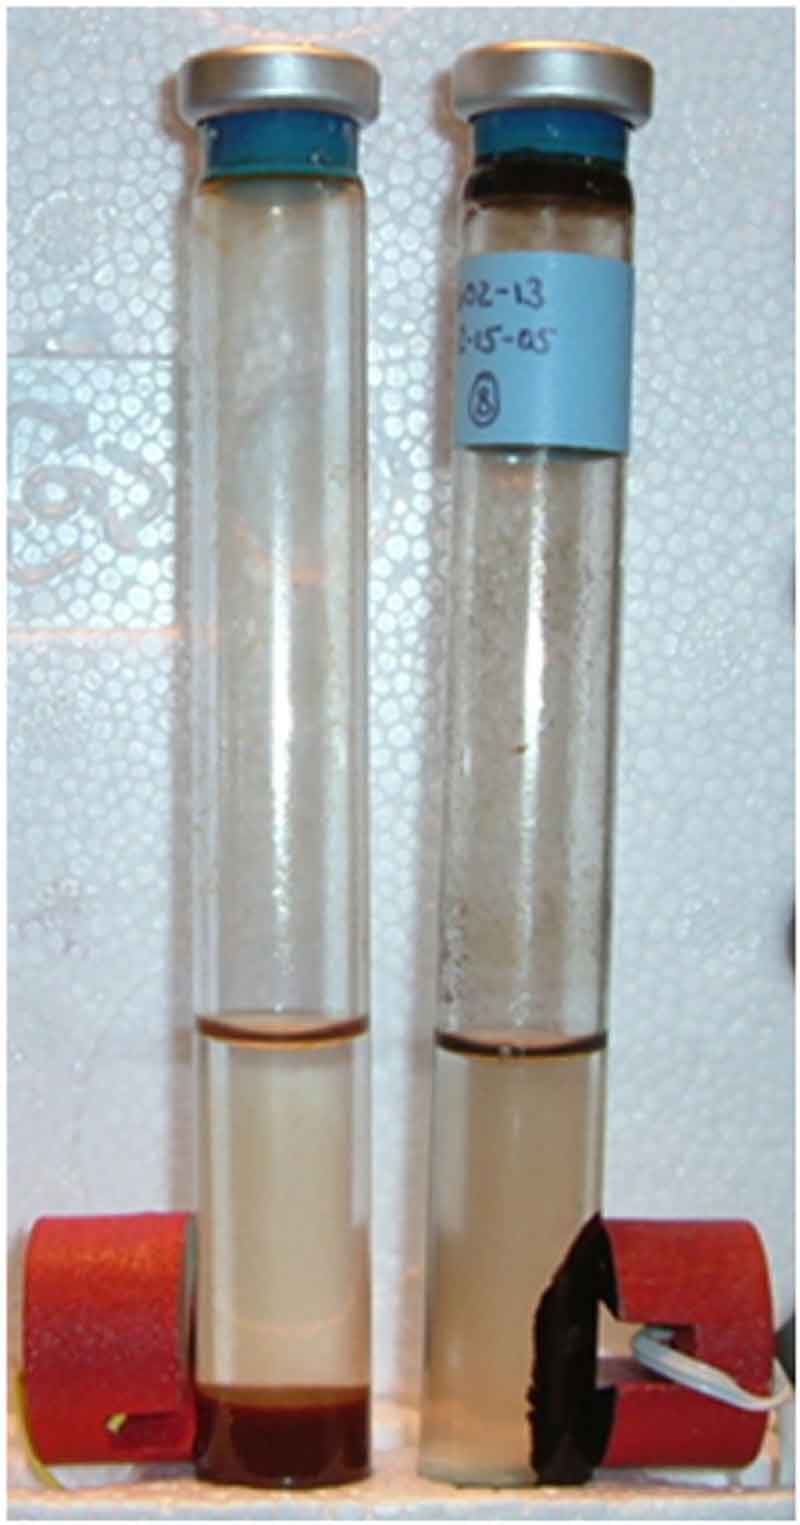 Growth of hyperthermophilic microbes that grow at 95°C (203°F) and convert hydrogen gas, carbon dioxide gas, and iron rust (brown material in left tube) into black magnetic iron (right tube). Red magnets are seen flanking both tubes.